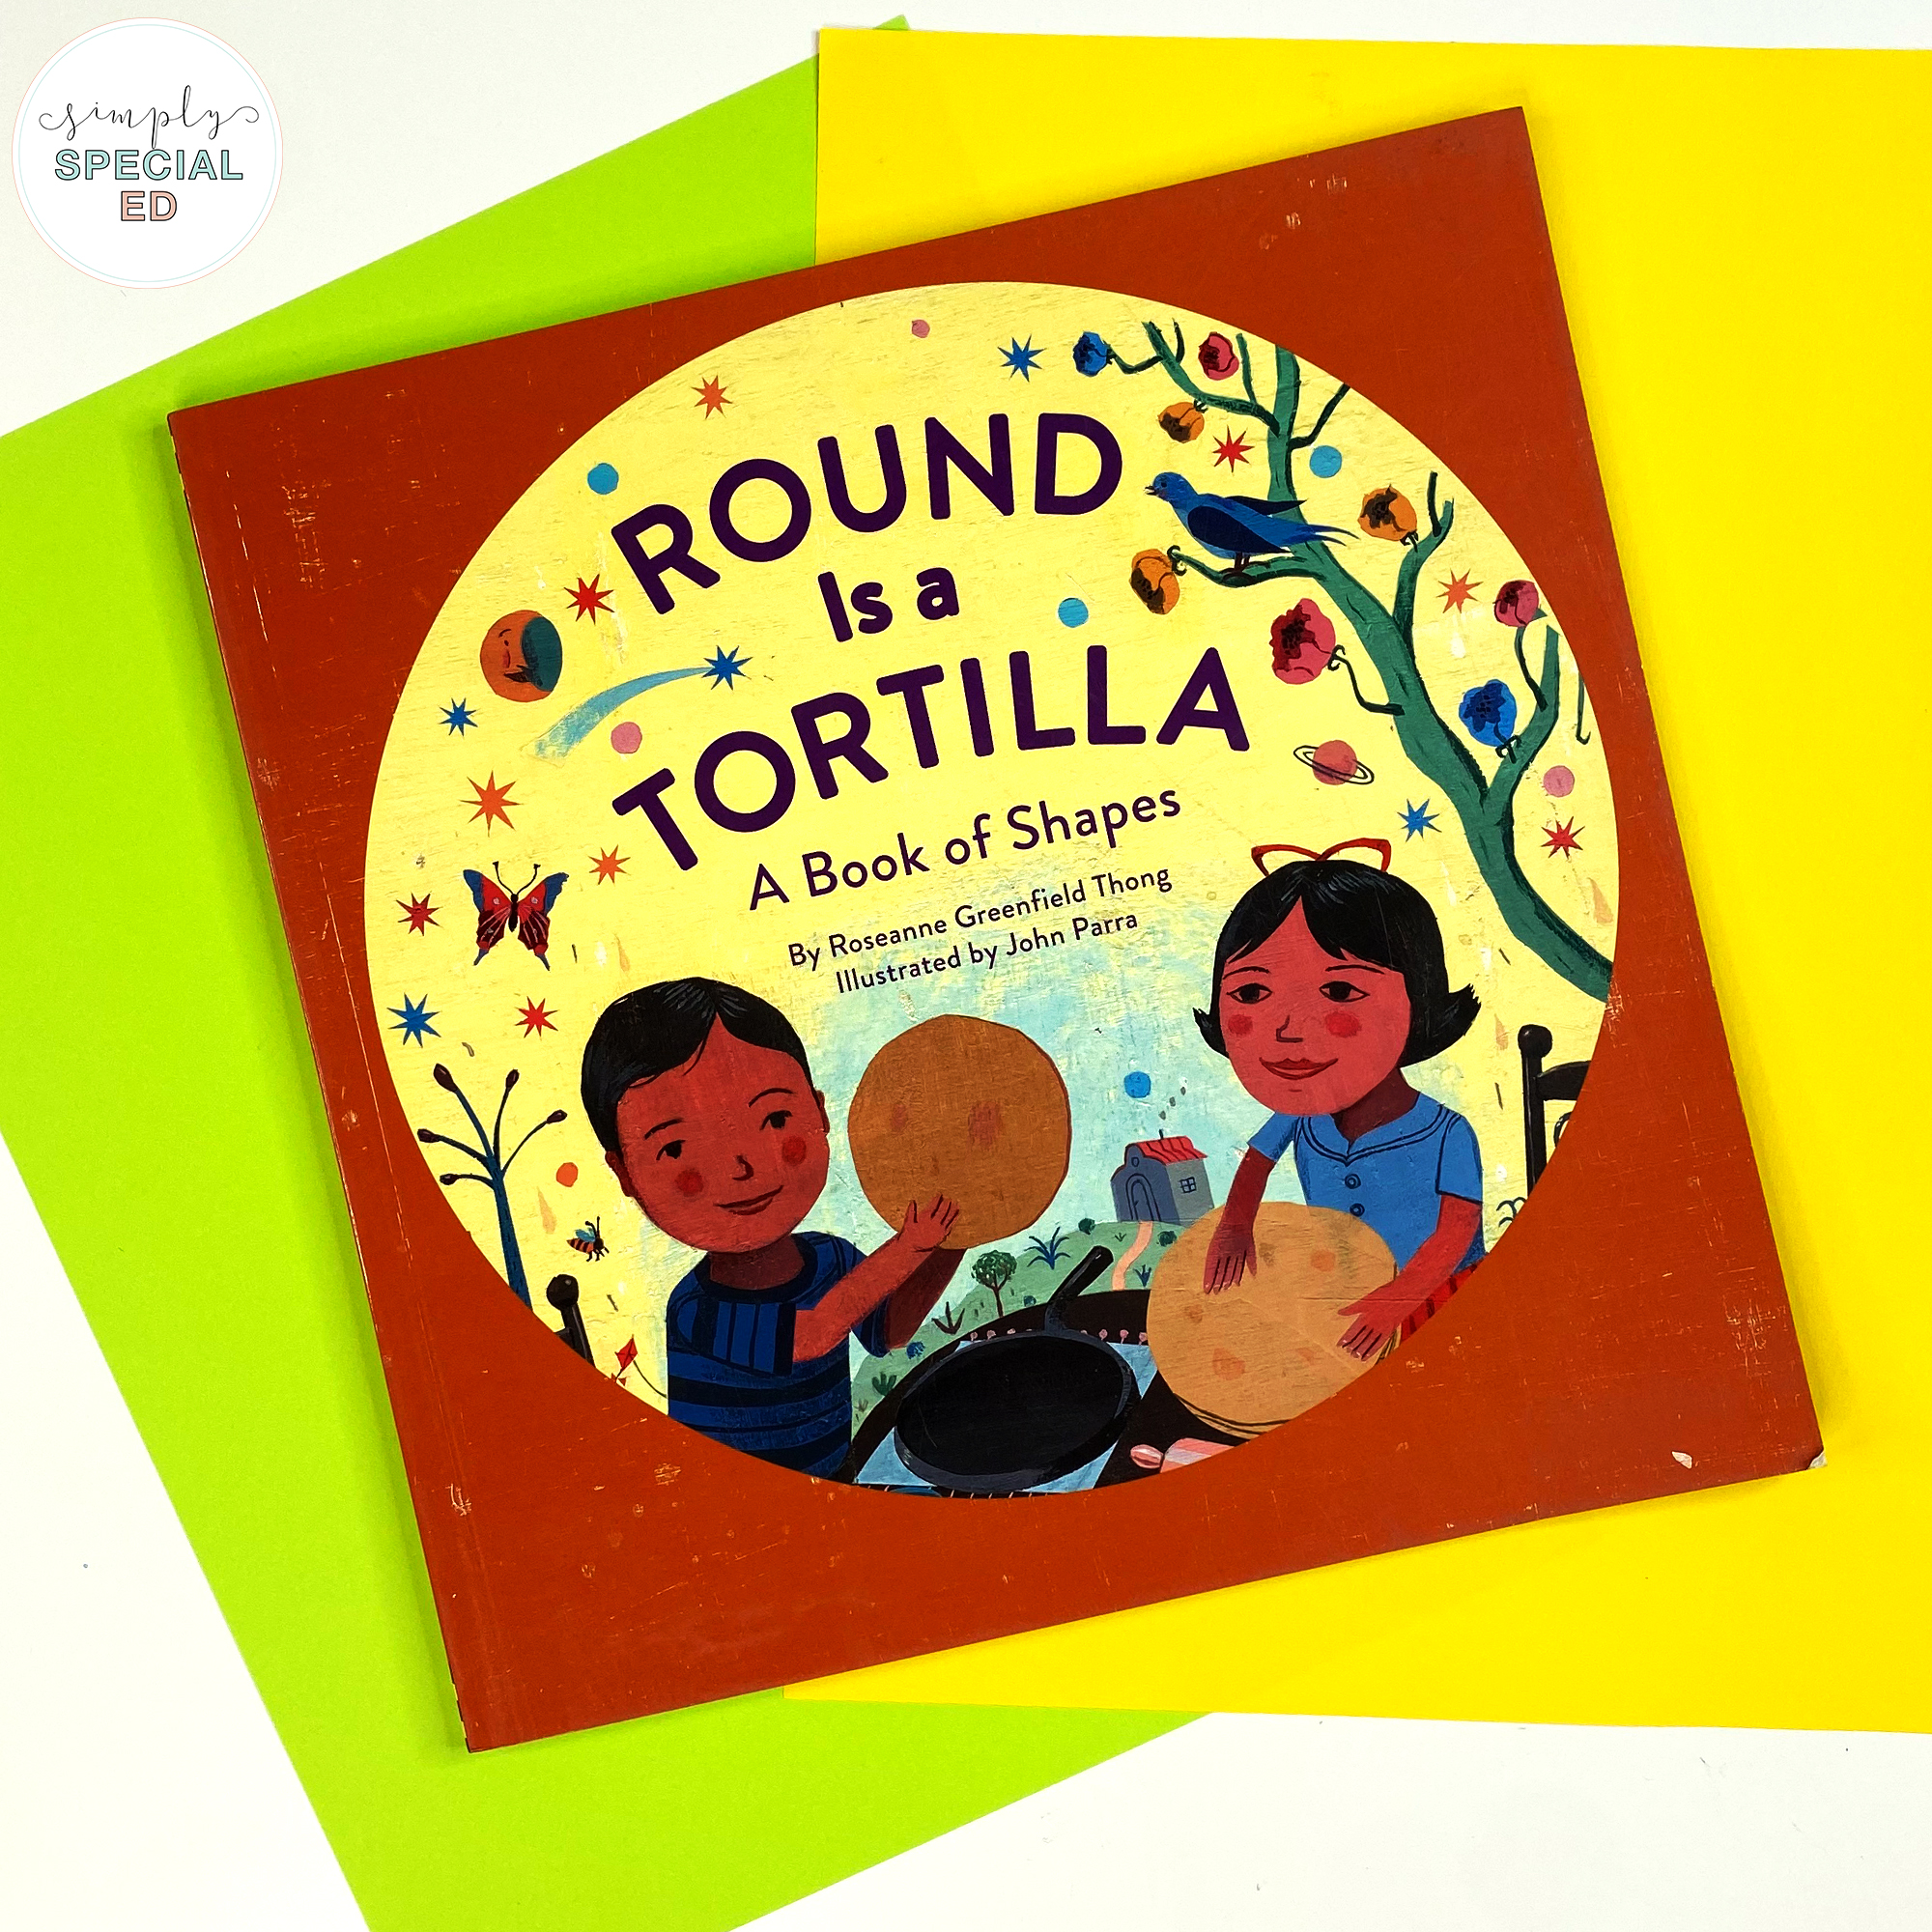 Round is a Tortilla by Roseann Greenfield Thong is a great book to connect to math about shapes in real life! Grab the free book companion.